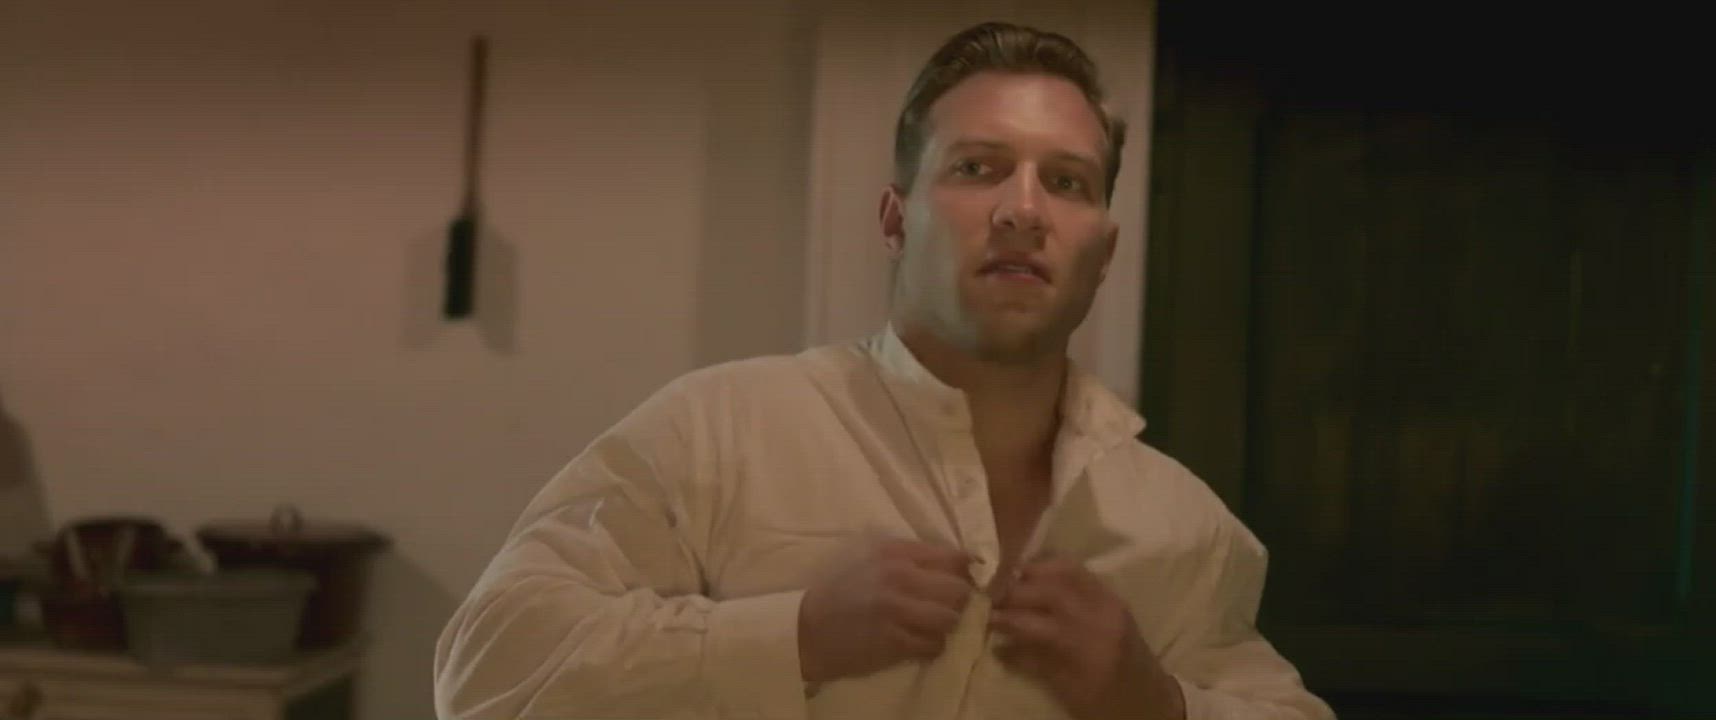 Jai Courtney - Australian Actor [More in Comments]